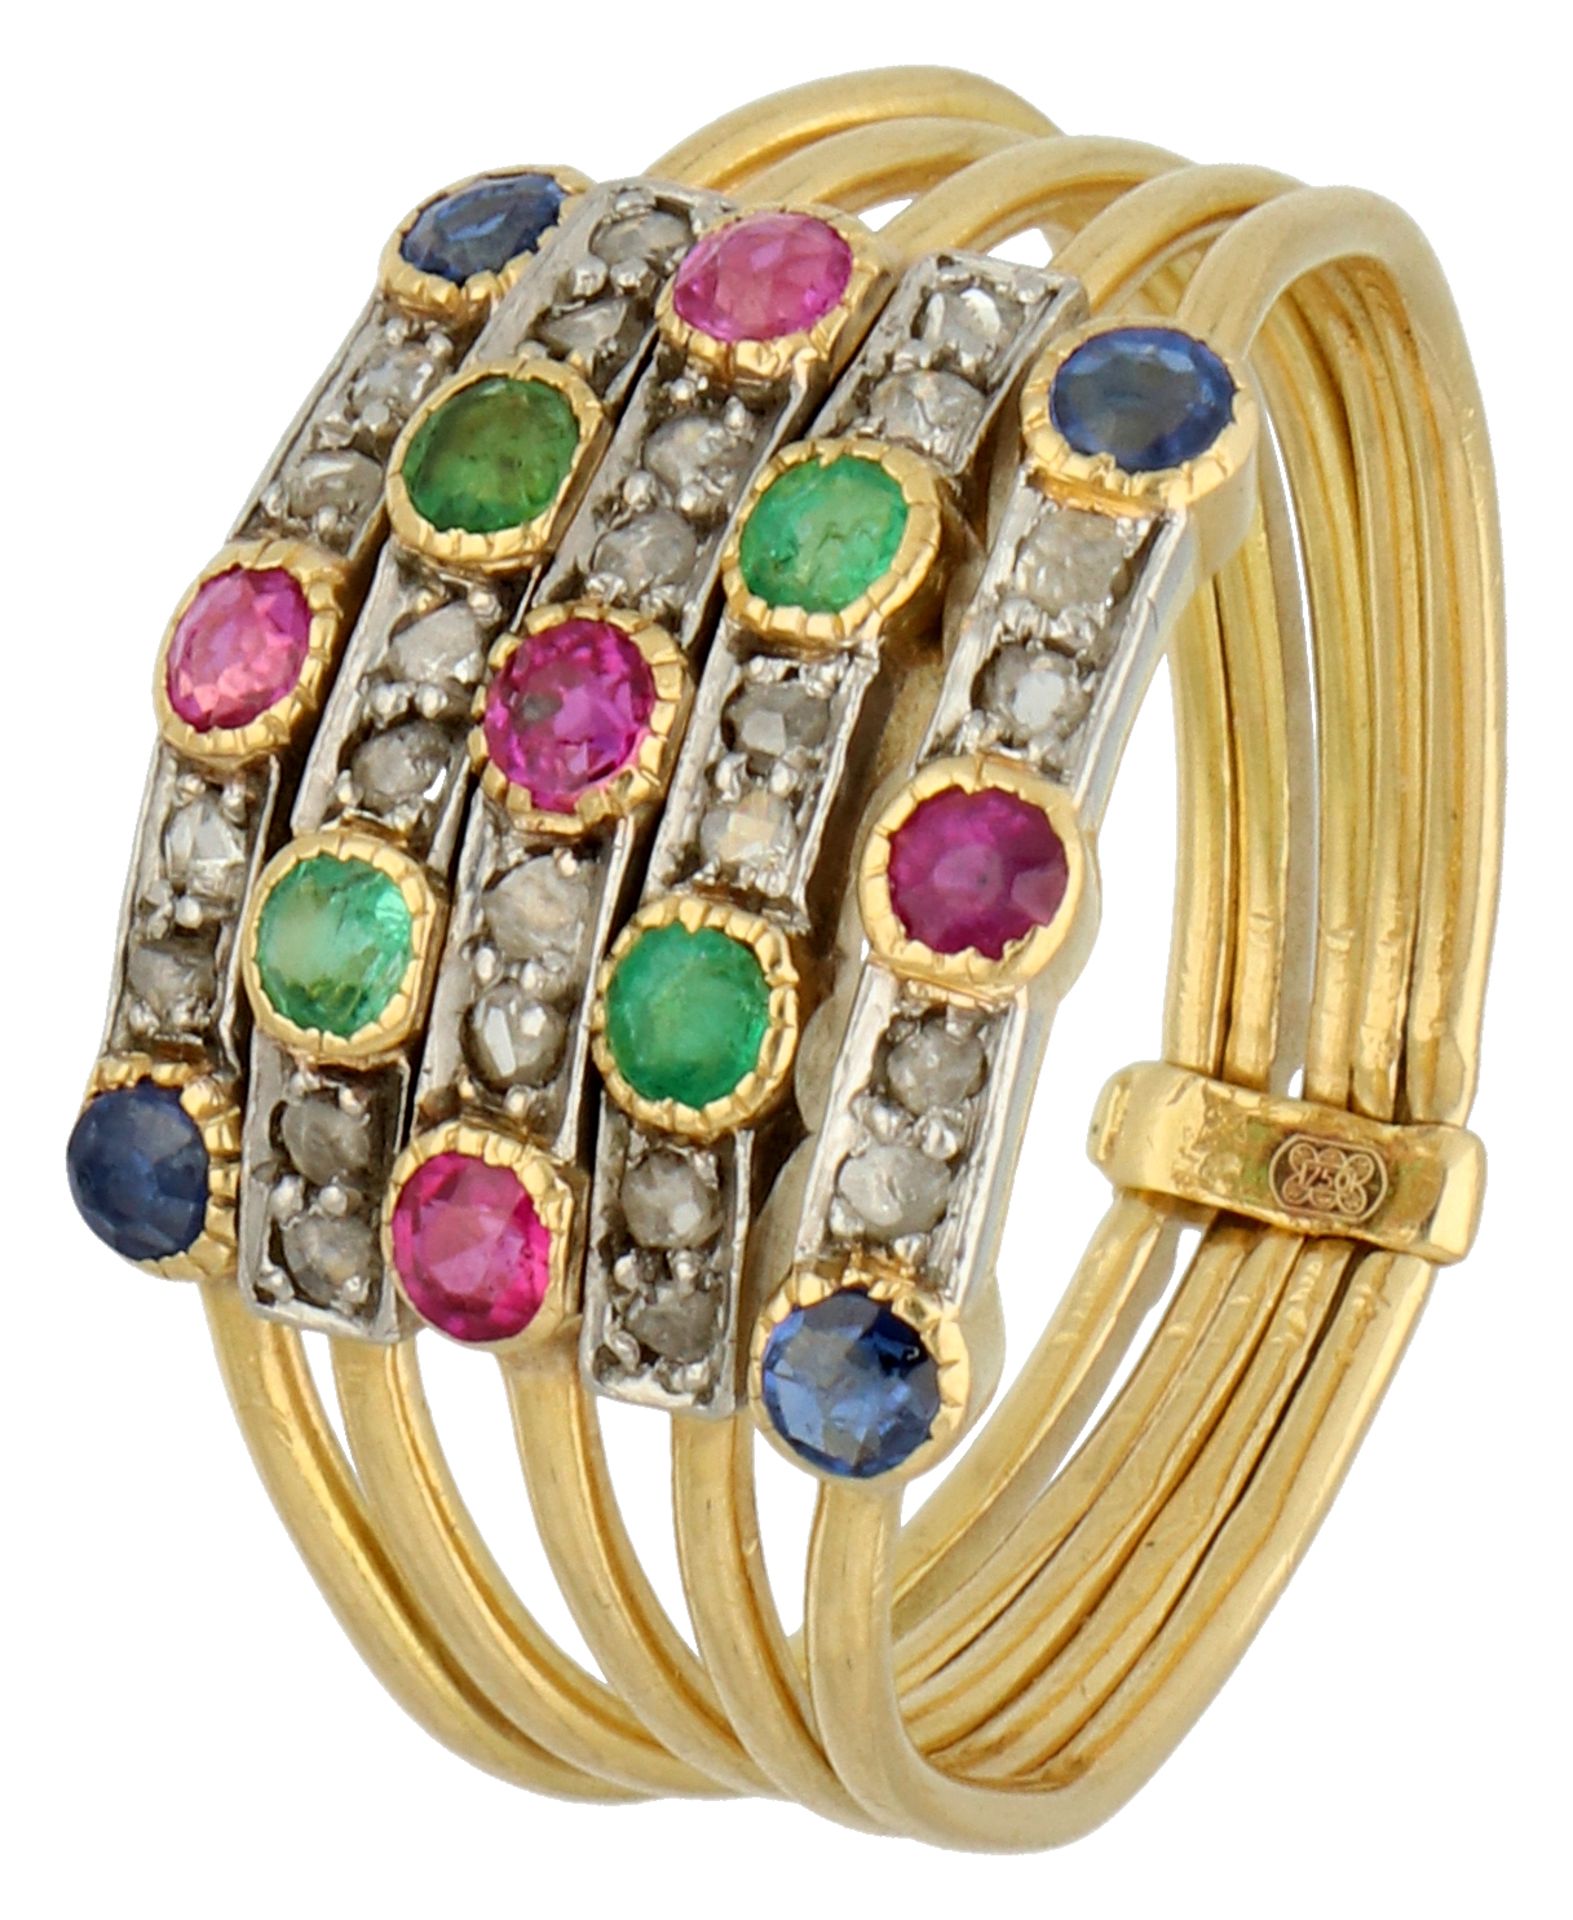 No reserve - 18K Yellow gold vintage harem ring set with diamond, ruby, sapphire and emerald.